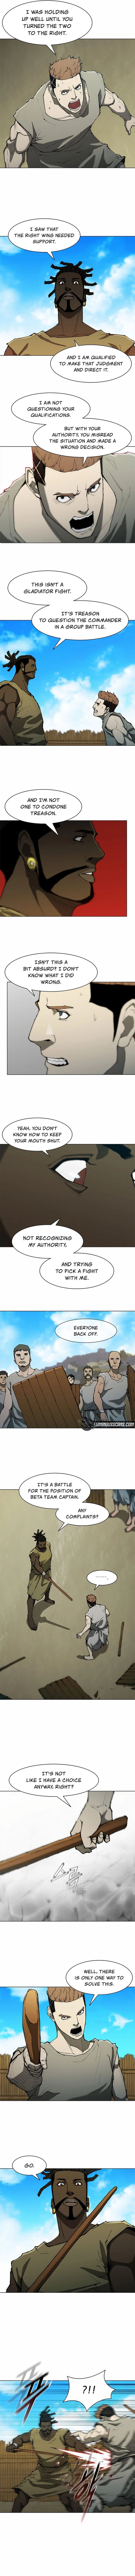 Long Way of the Warrior - Chapter 71 Page 4